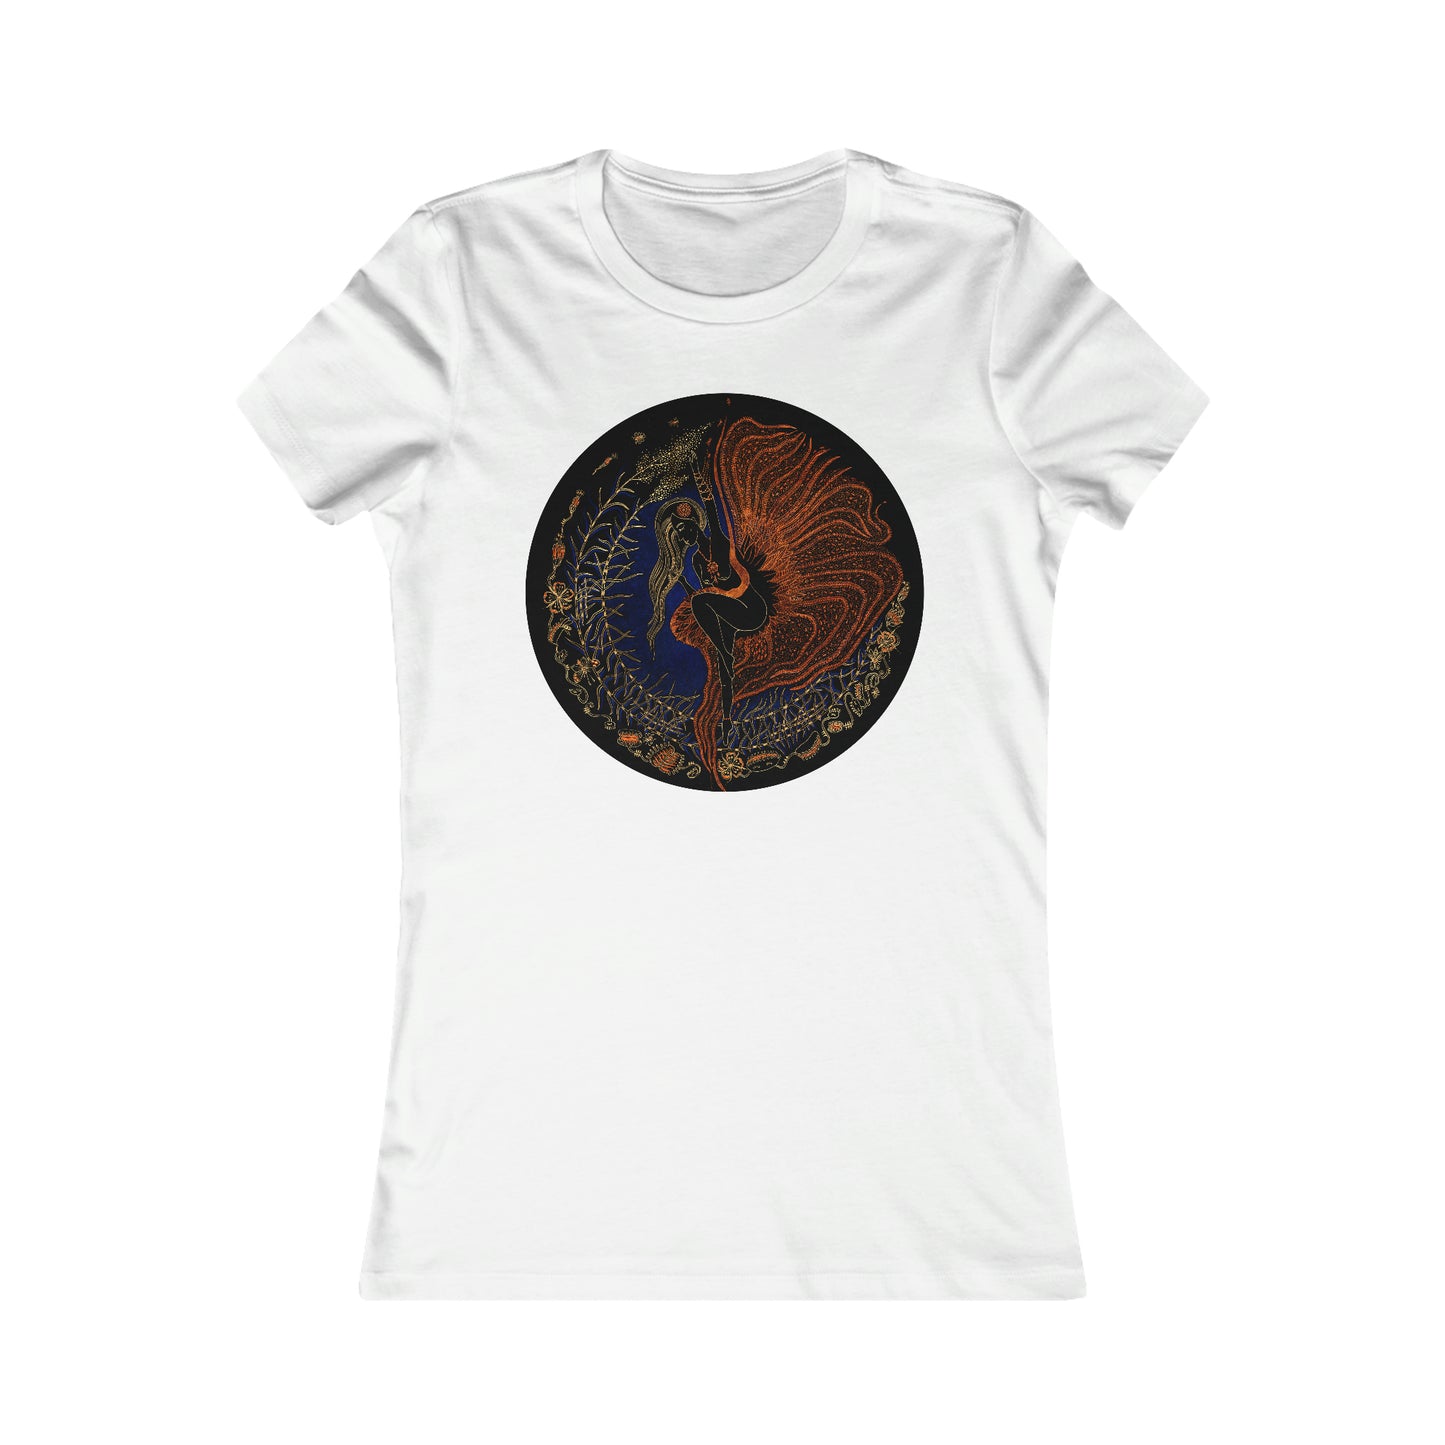 Chinese Zodiac Sign T Shirt (Rooster)